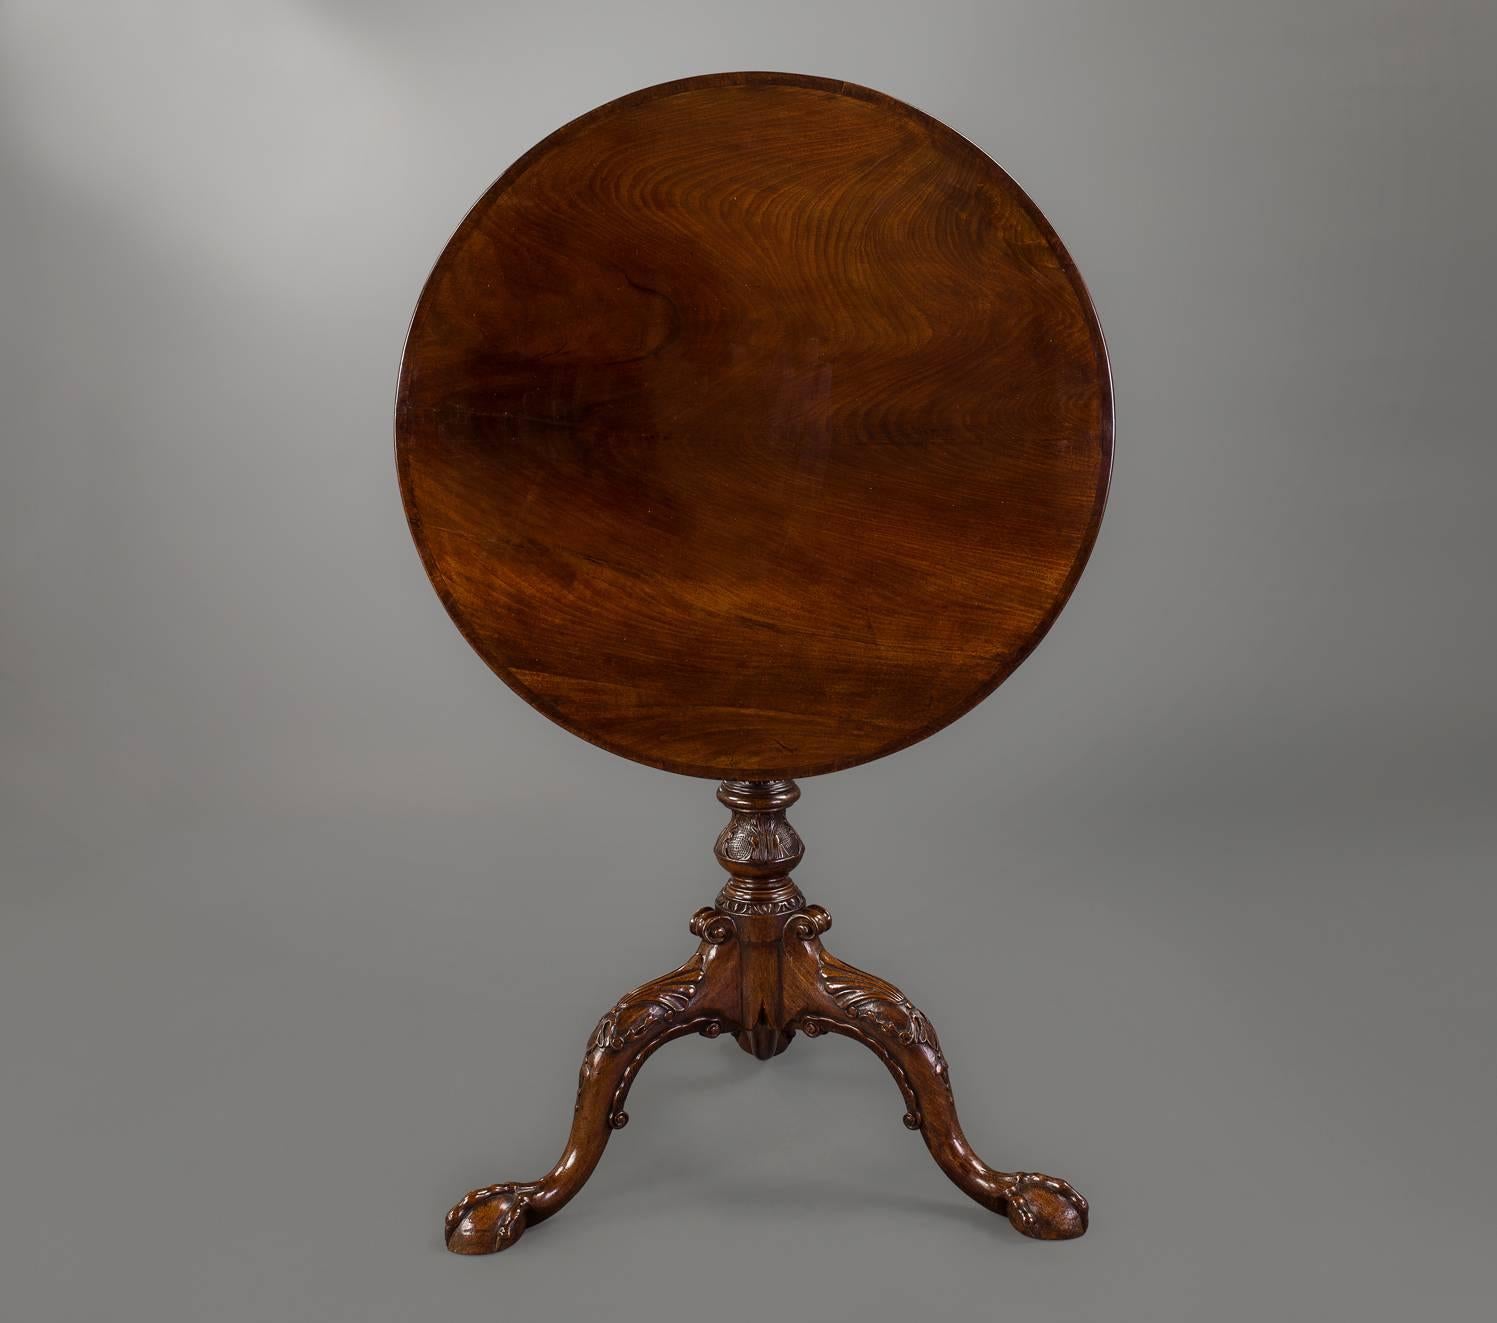 A fine Chippendale period tripod tea table this table makes the transition to the more delicate style of the third quarter of the 18th century.
This mid-18th century table has a delicate single- piece cross-banded top that is in distinct contrast